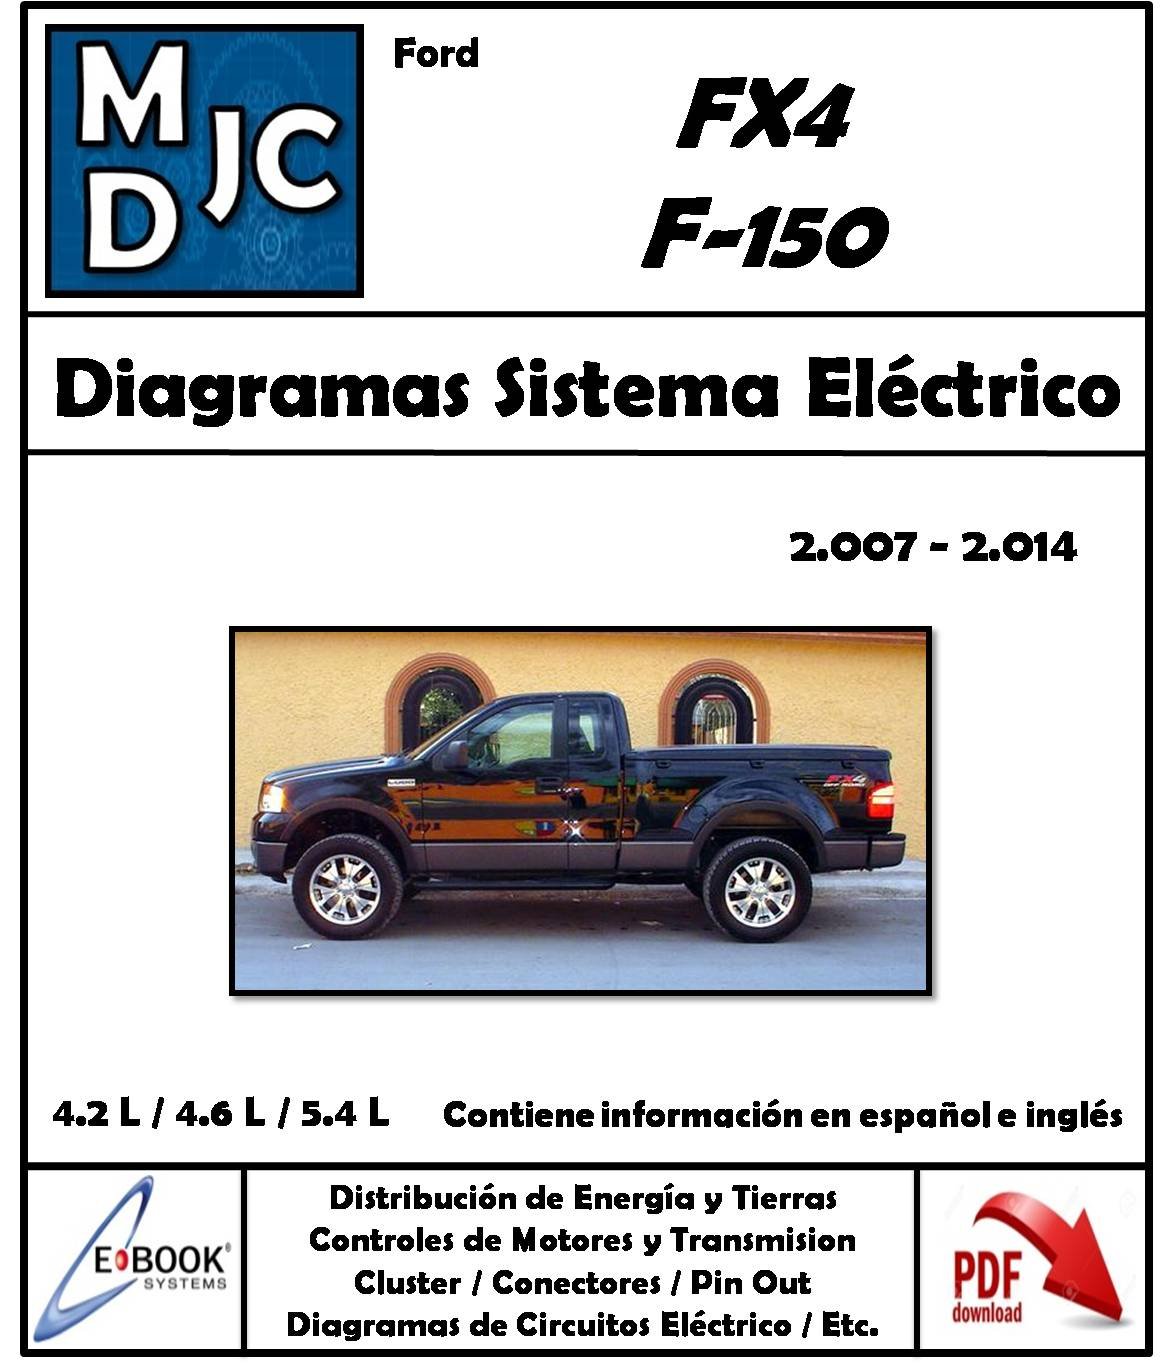 Ford F-150 / FX4 2007 - 2014